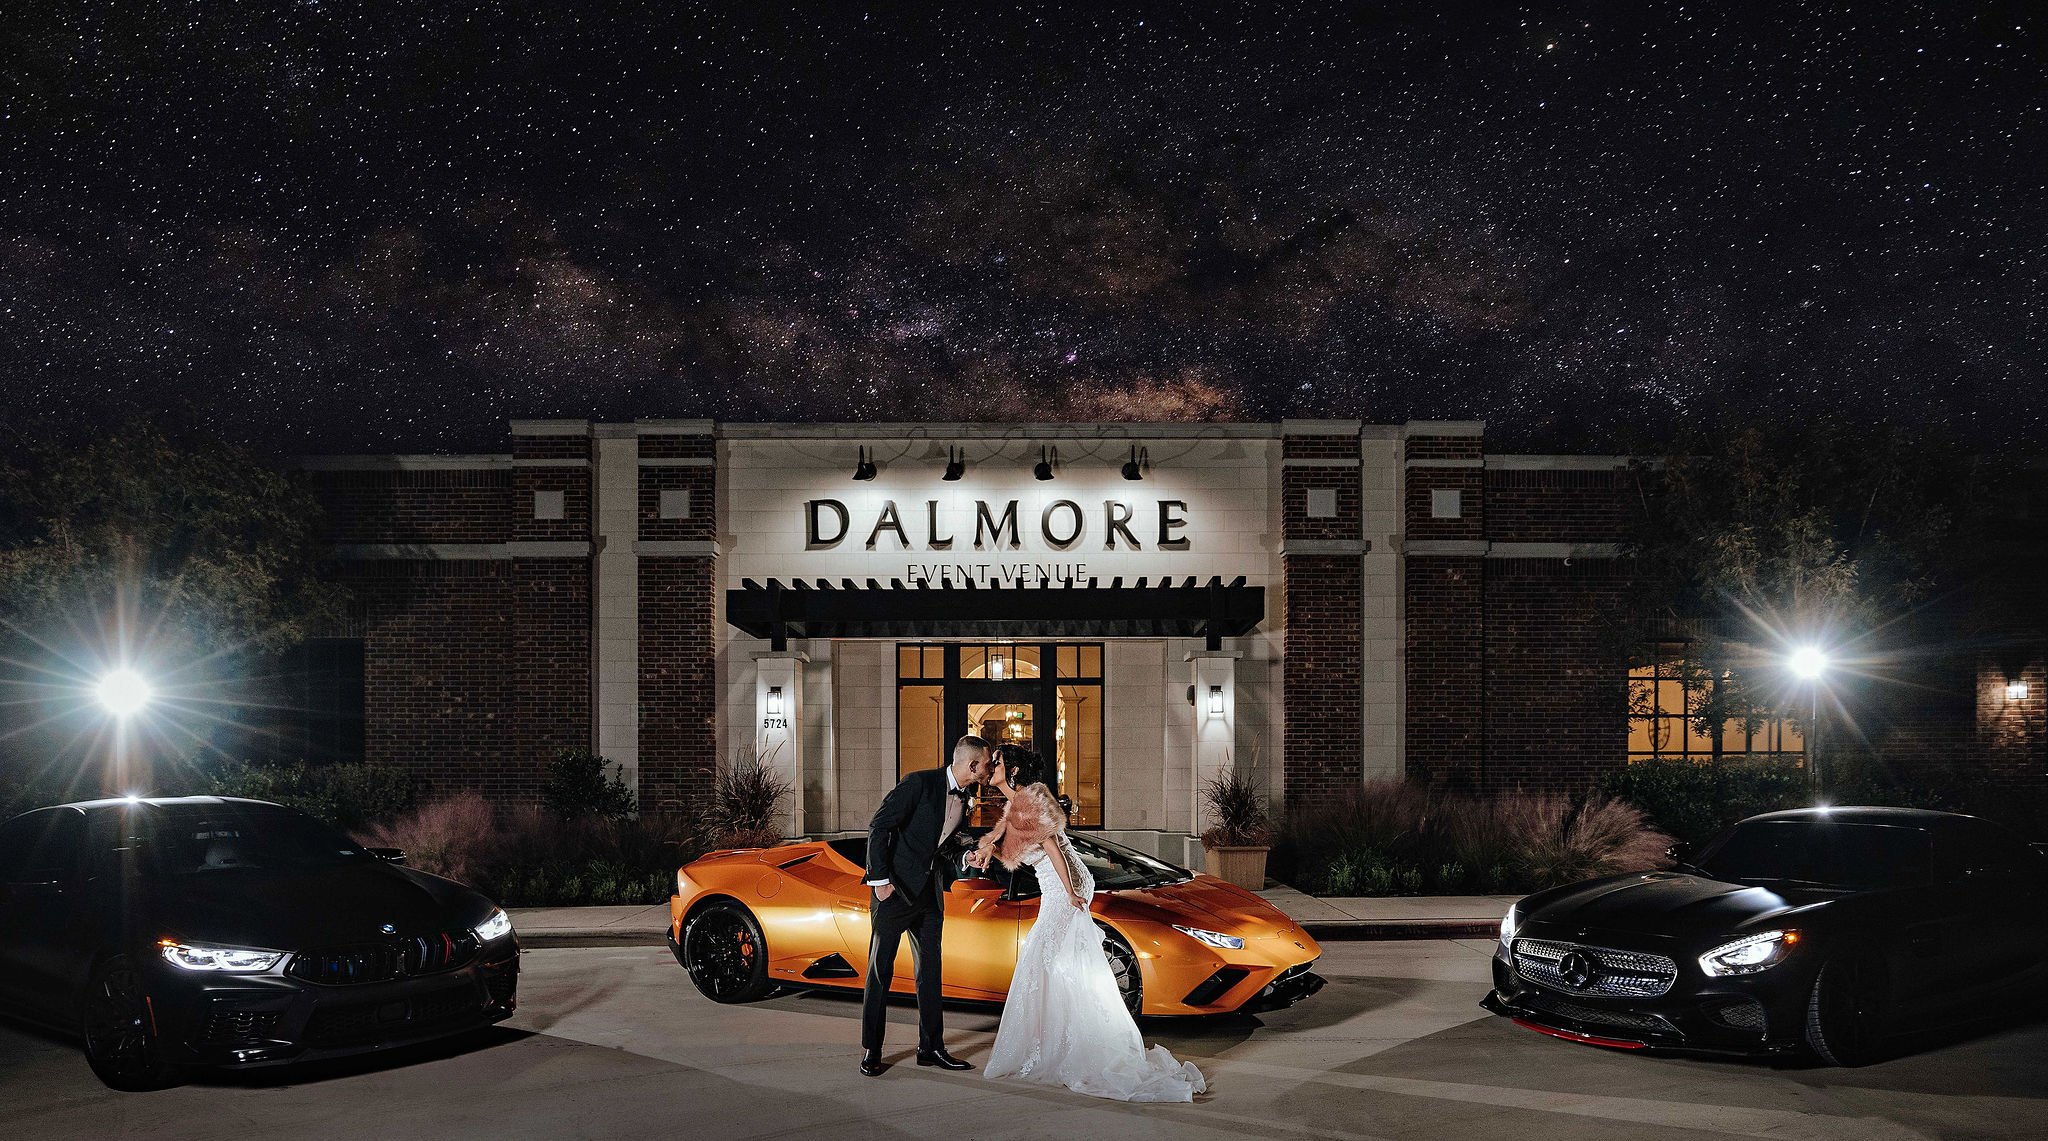 The Dalmore Wedding Photographer - Fort Worth Wedding Photographer - the dalmore event venue.jpg